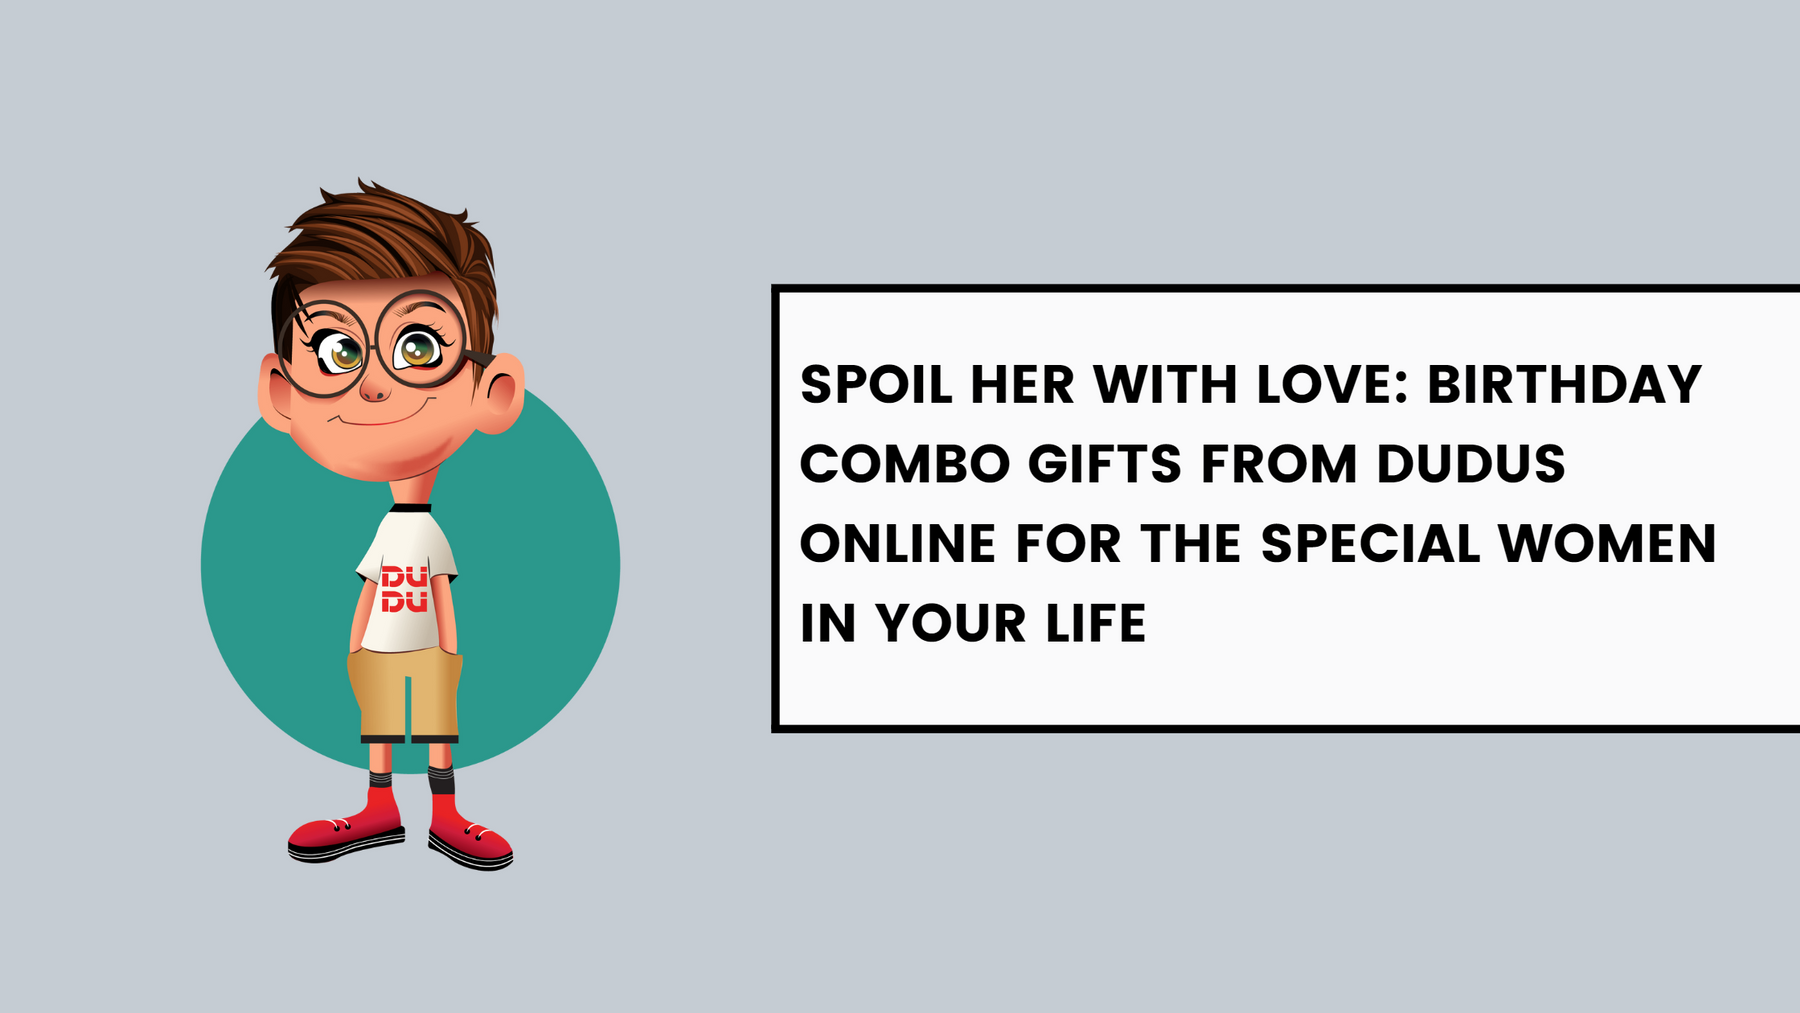 Spoil Her With Love: Birthday Combo Gifts From Dudus Online For The Special Women In Your Life